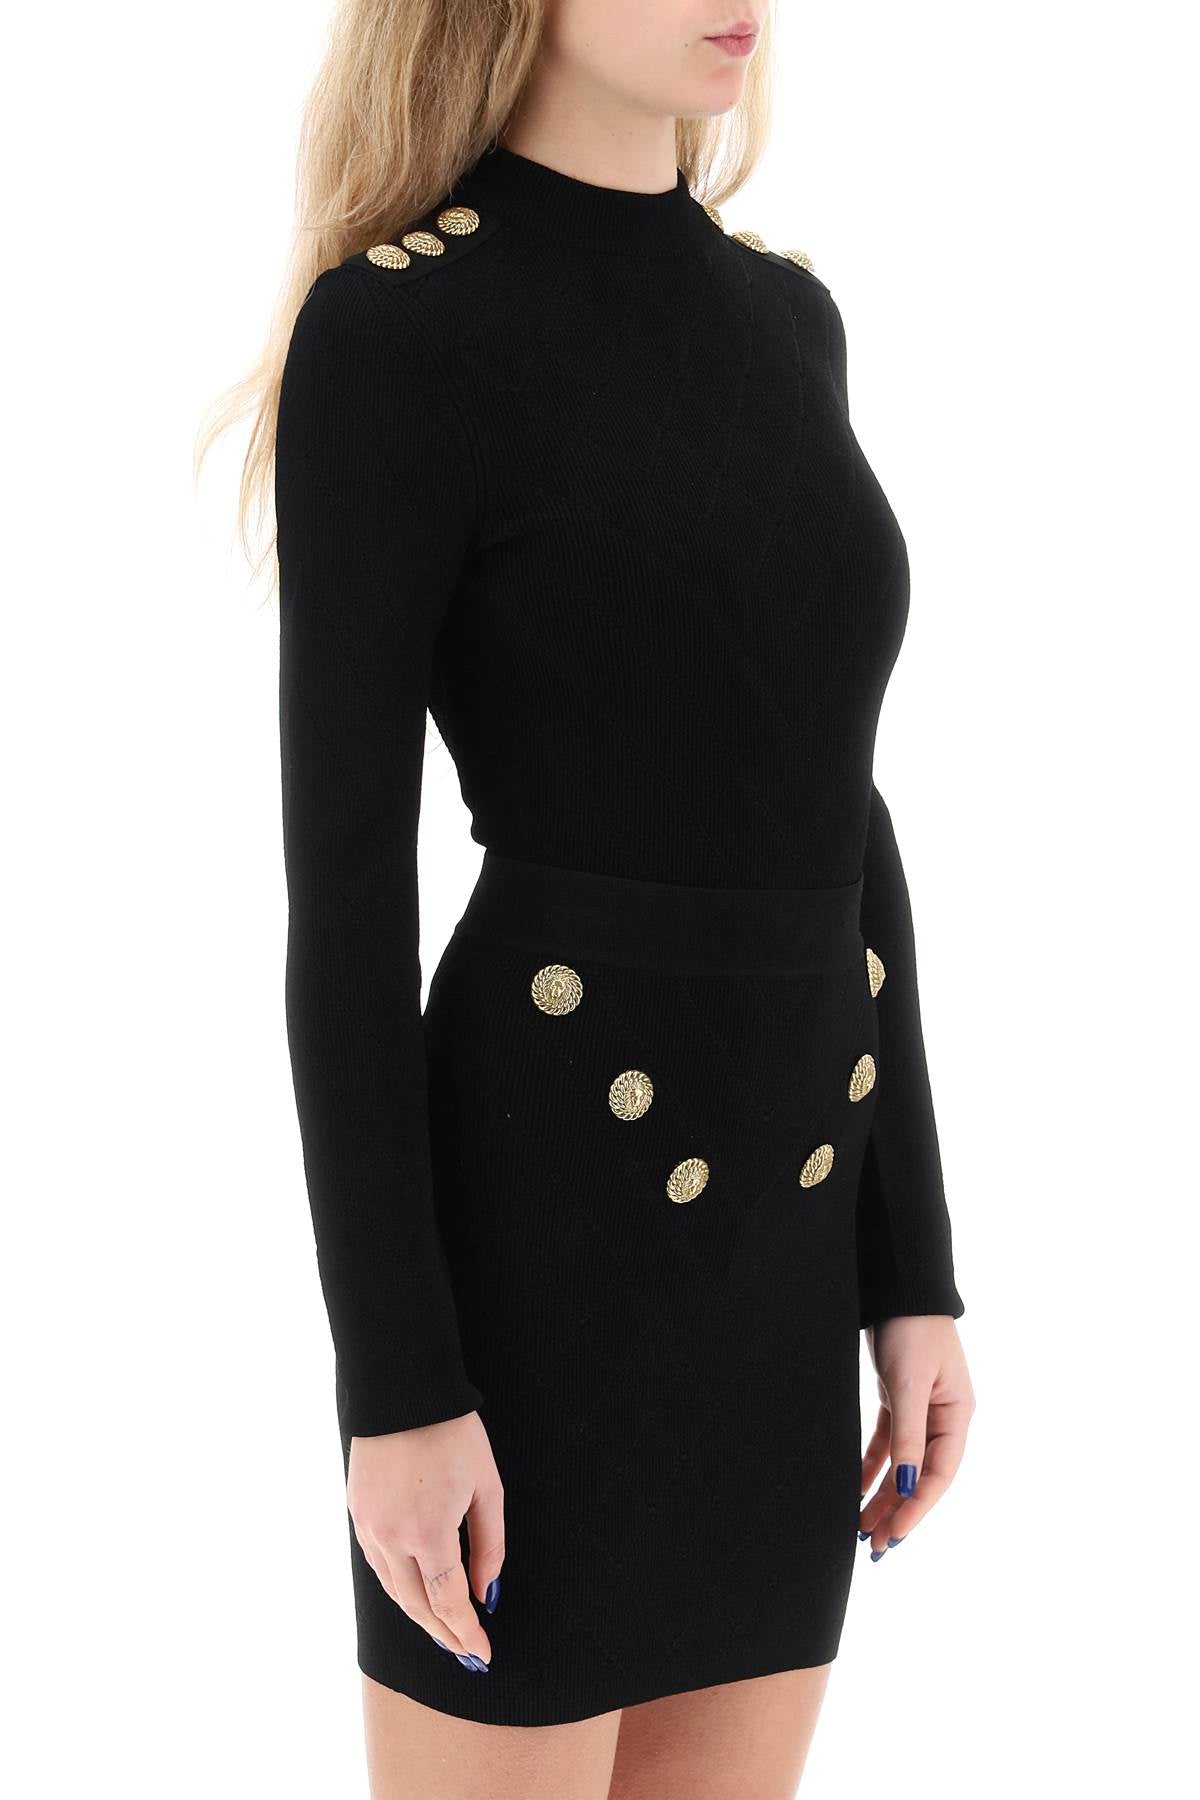 Balmain knitted bodysuit with embossed buttons CF1BG240KF530PA